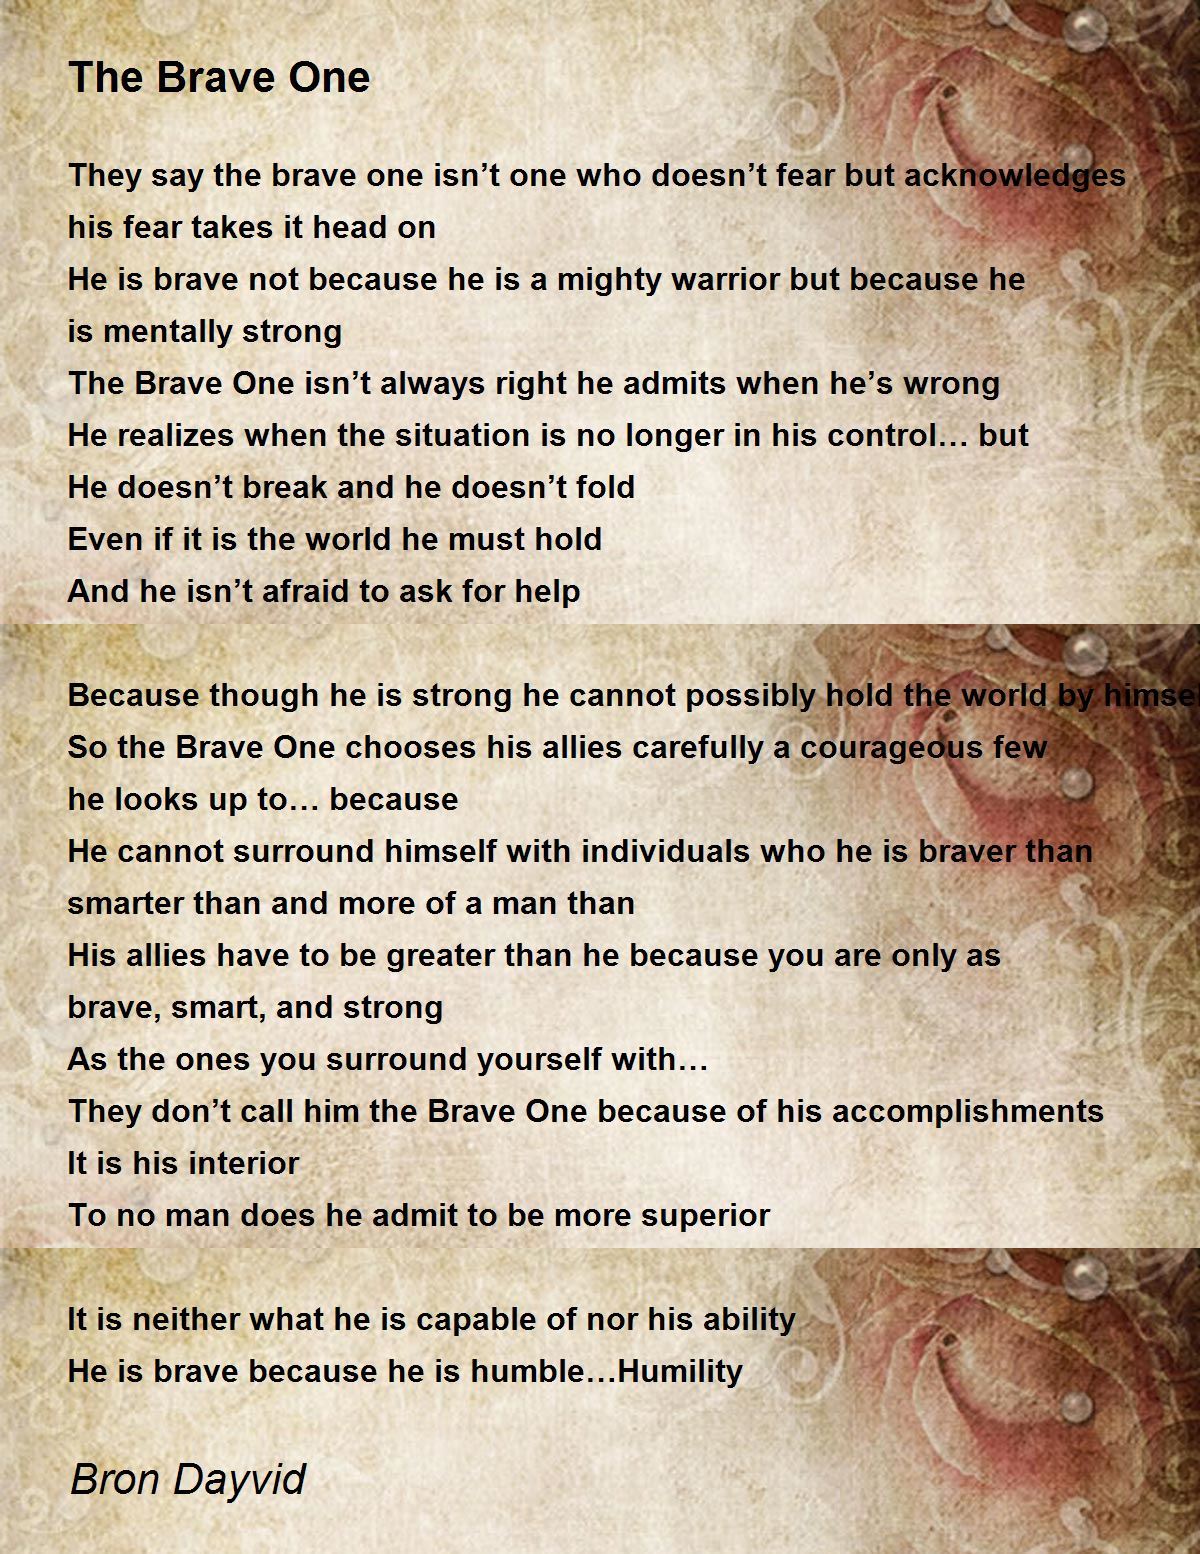 The Brave One - The Brave One Poem by Bron Dayvid